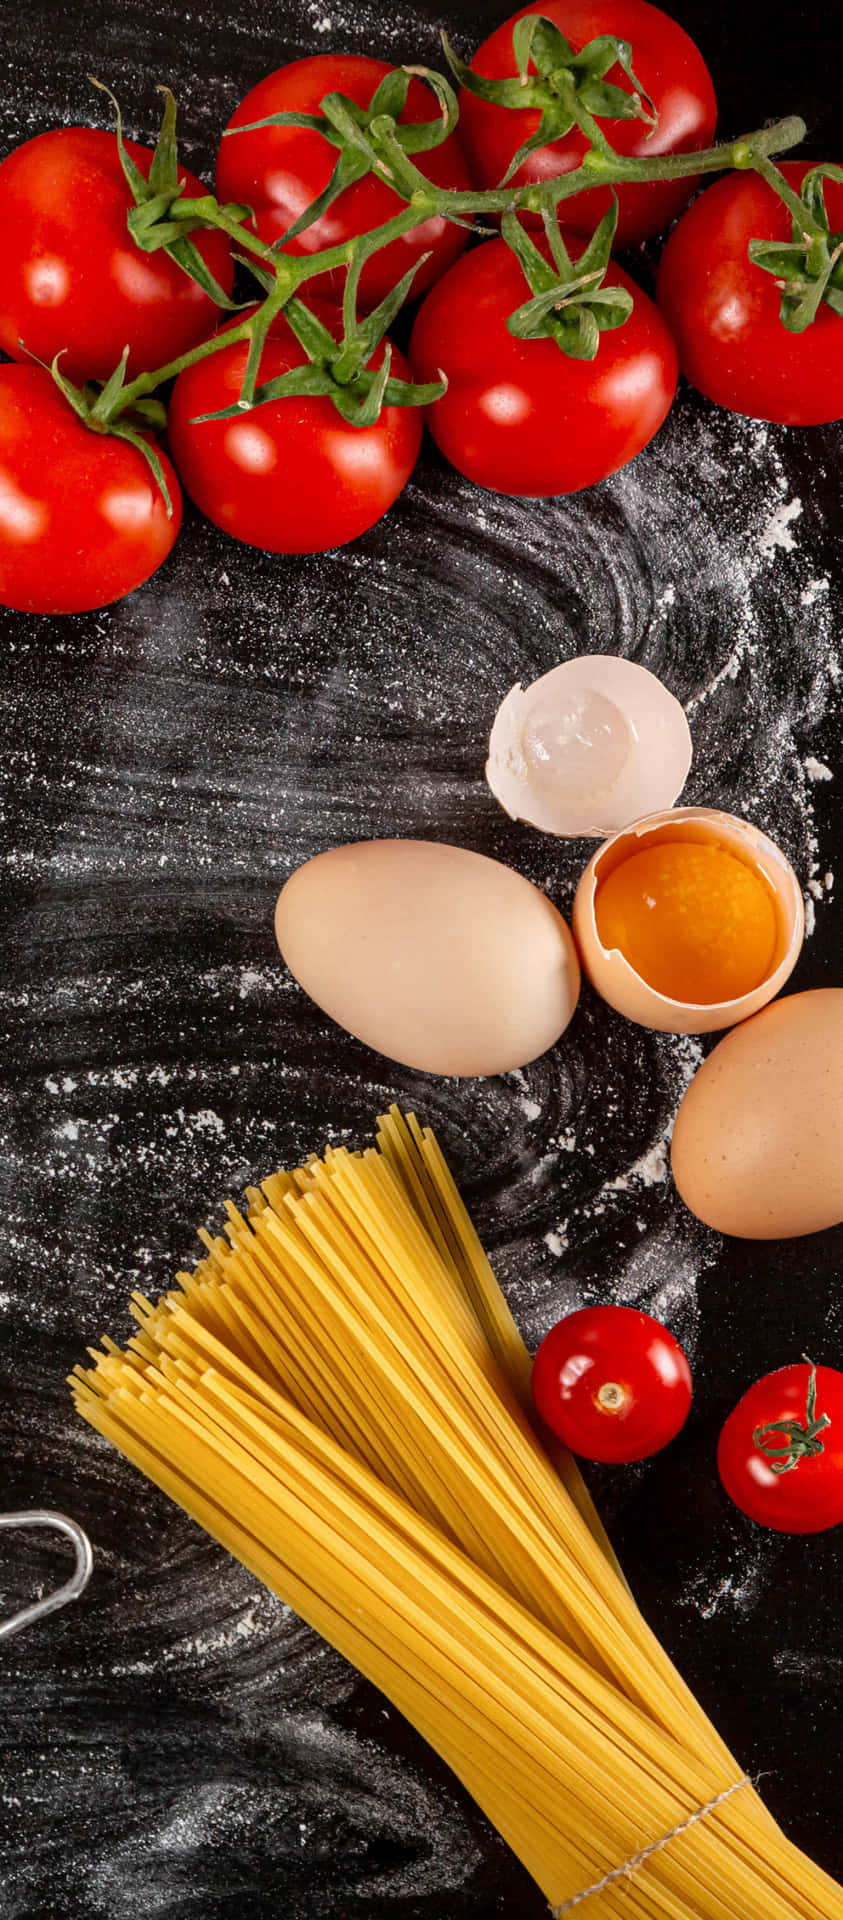 A Table With Pasta, Eggs, Tomatoes, And Other Ingredients